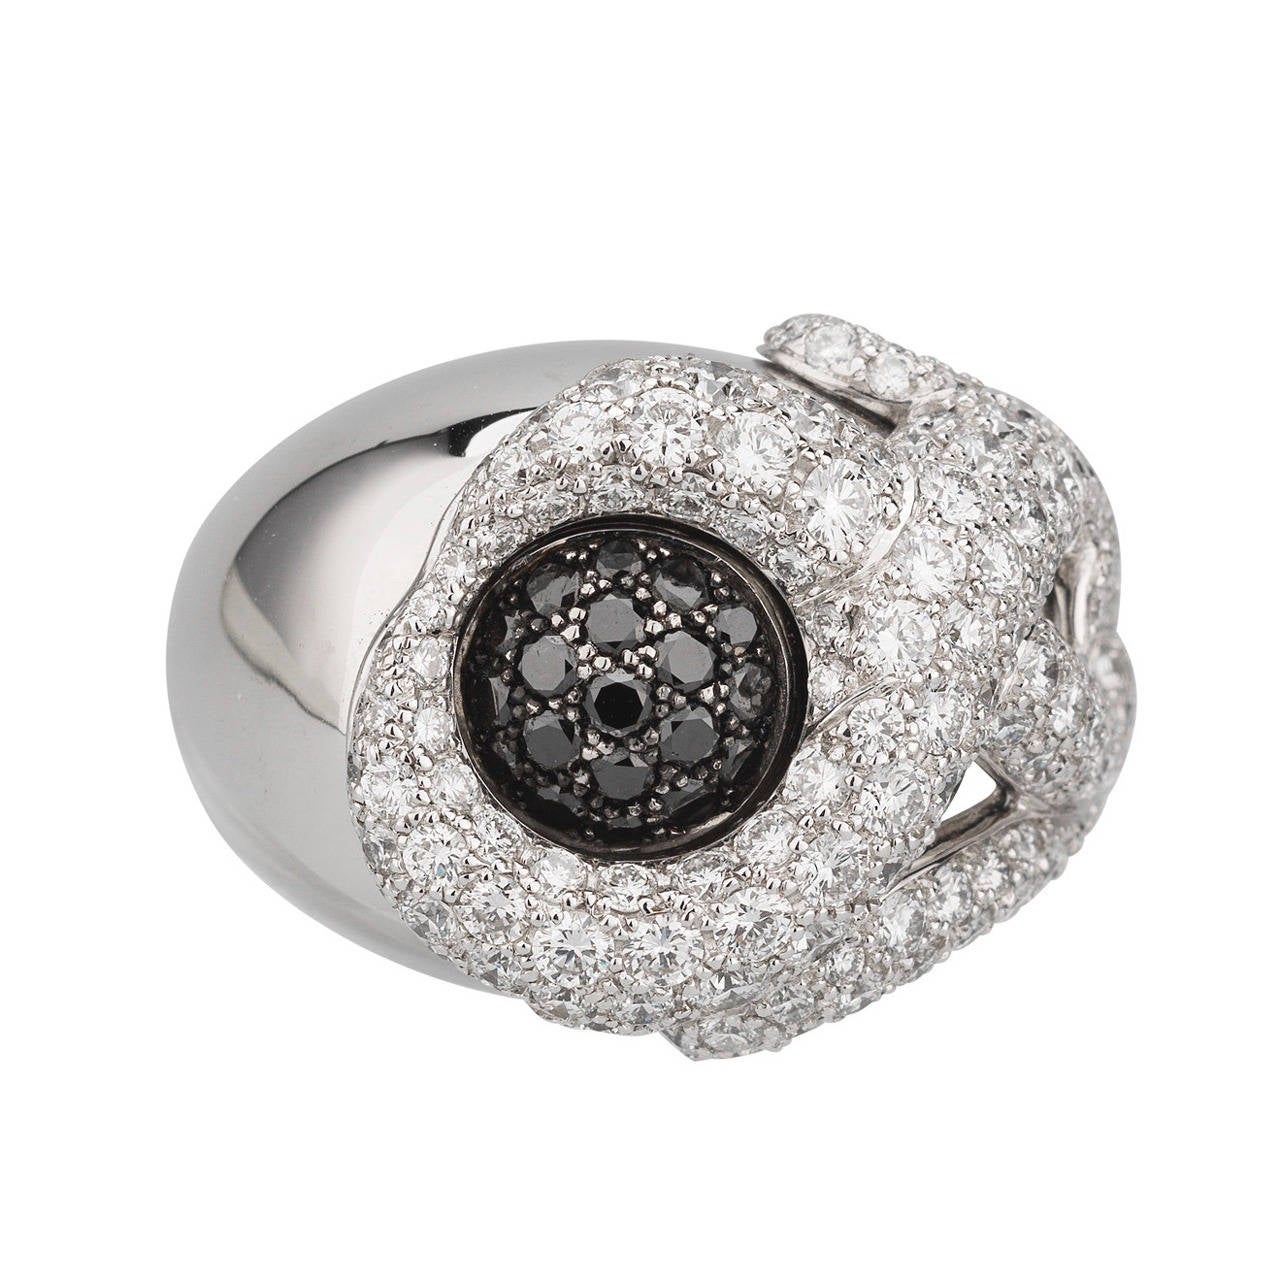 Surprising 18k white gold ring signed « DE GRISOGONO ». 
It is enhanced with diamond floral decoration centered by a rotative sphere entirely set with White, Brown and Black Diamonds.

Diamonds total weight: 6.10 carats.
Signed De Grisogono,